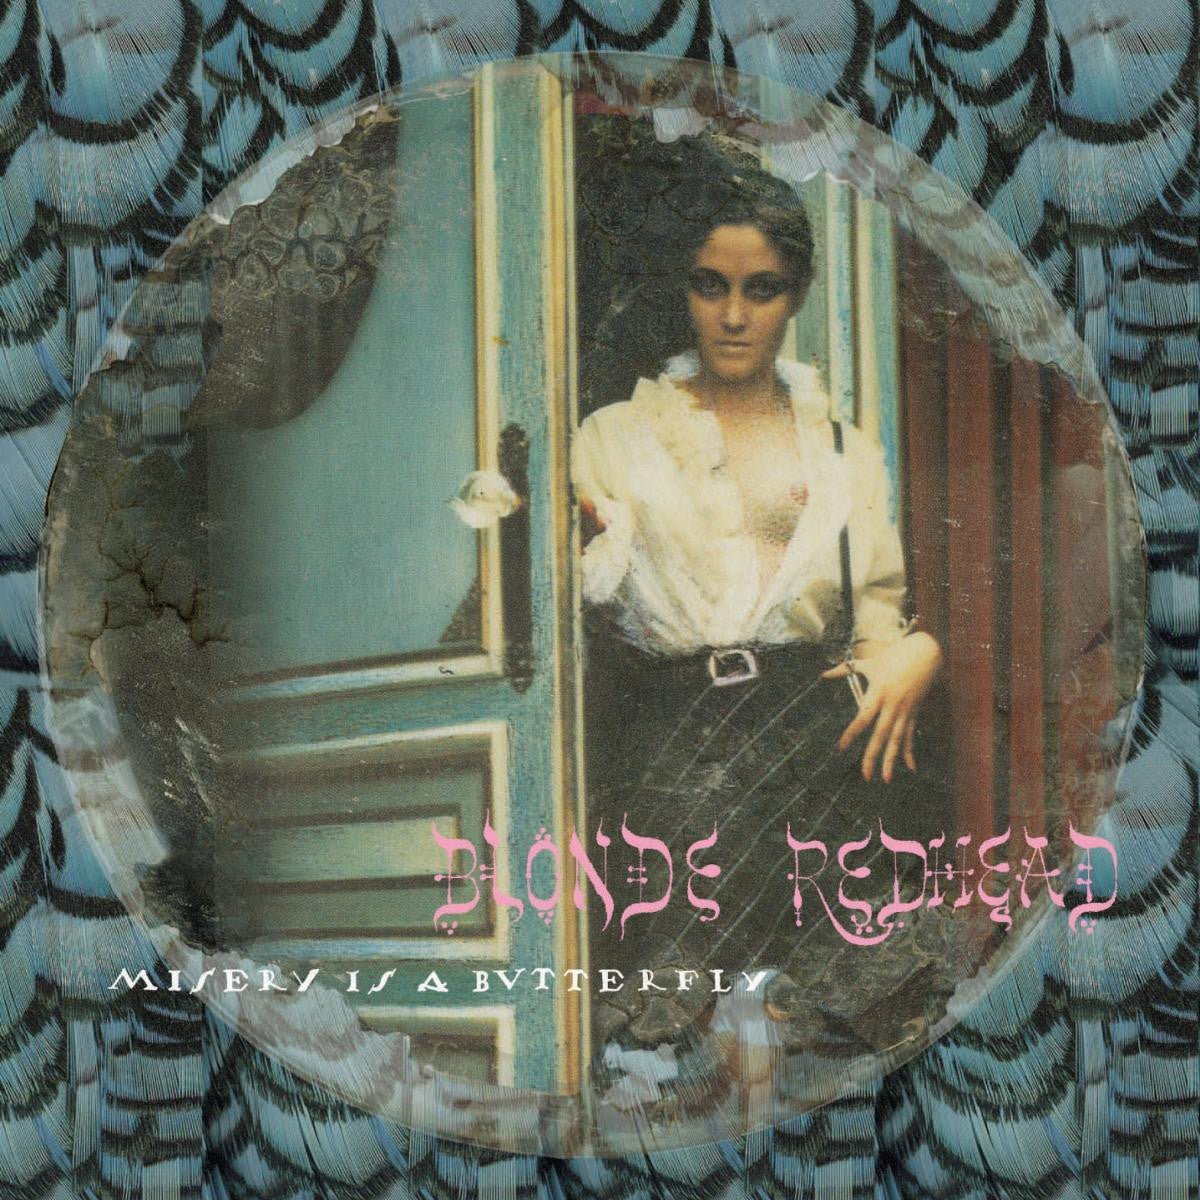 Blonde Redhead: Misery Is a Butterfly: Black Vinyl - Steadfast Records